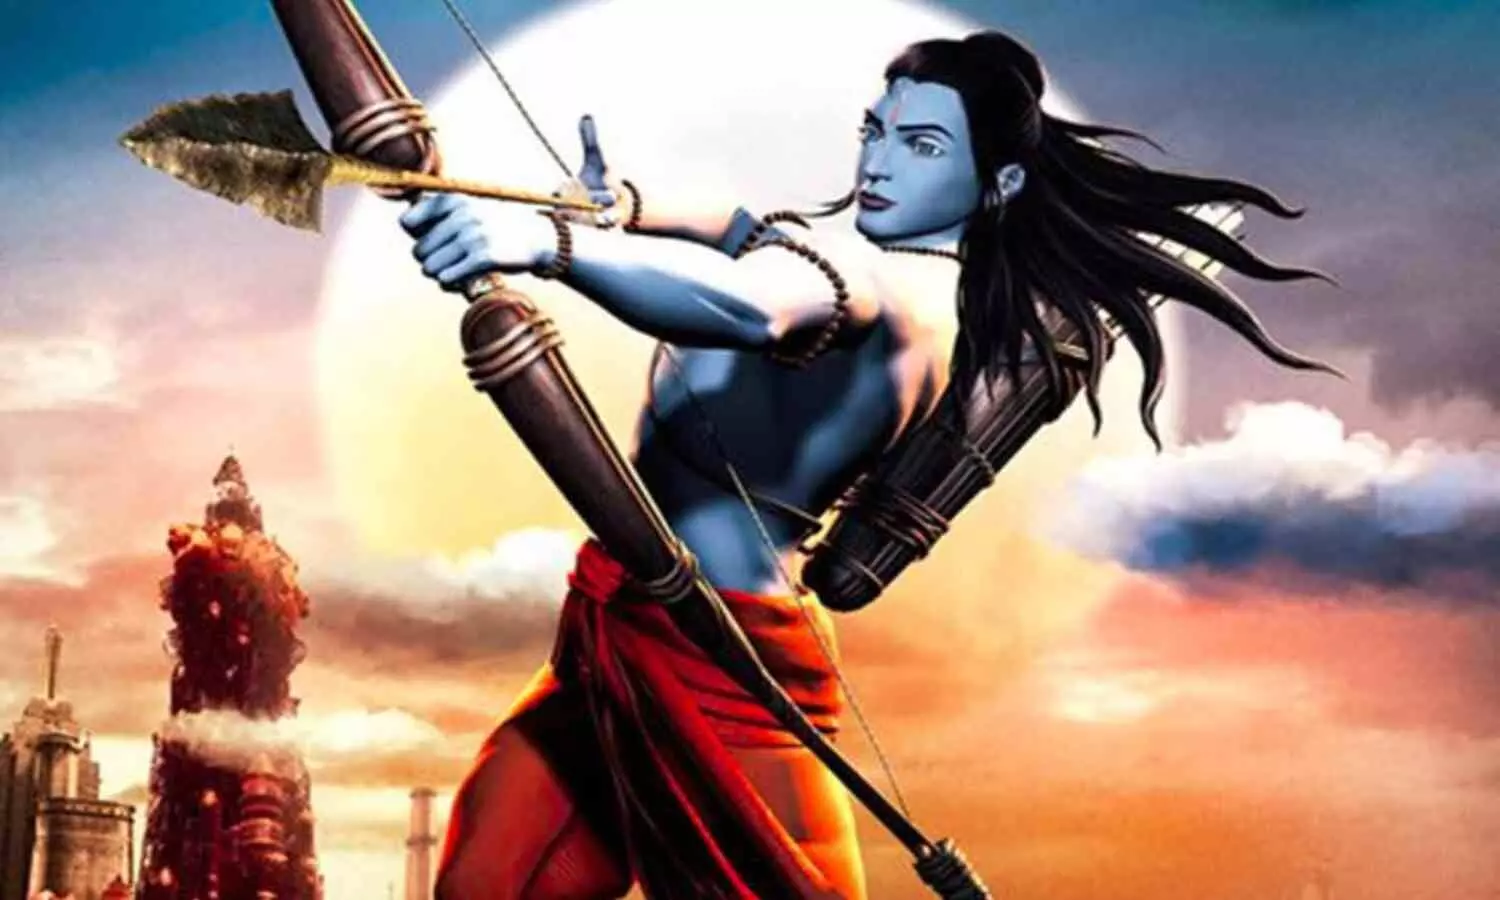 Ramayana Movie: Ramayana: The Legend of Prince Rama: Why India Banned the  Anime Film | Viral News, Times Now